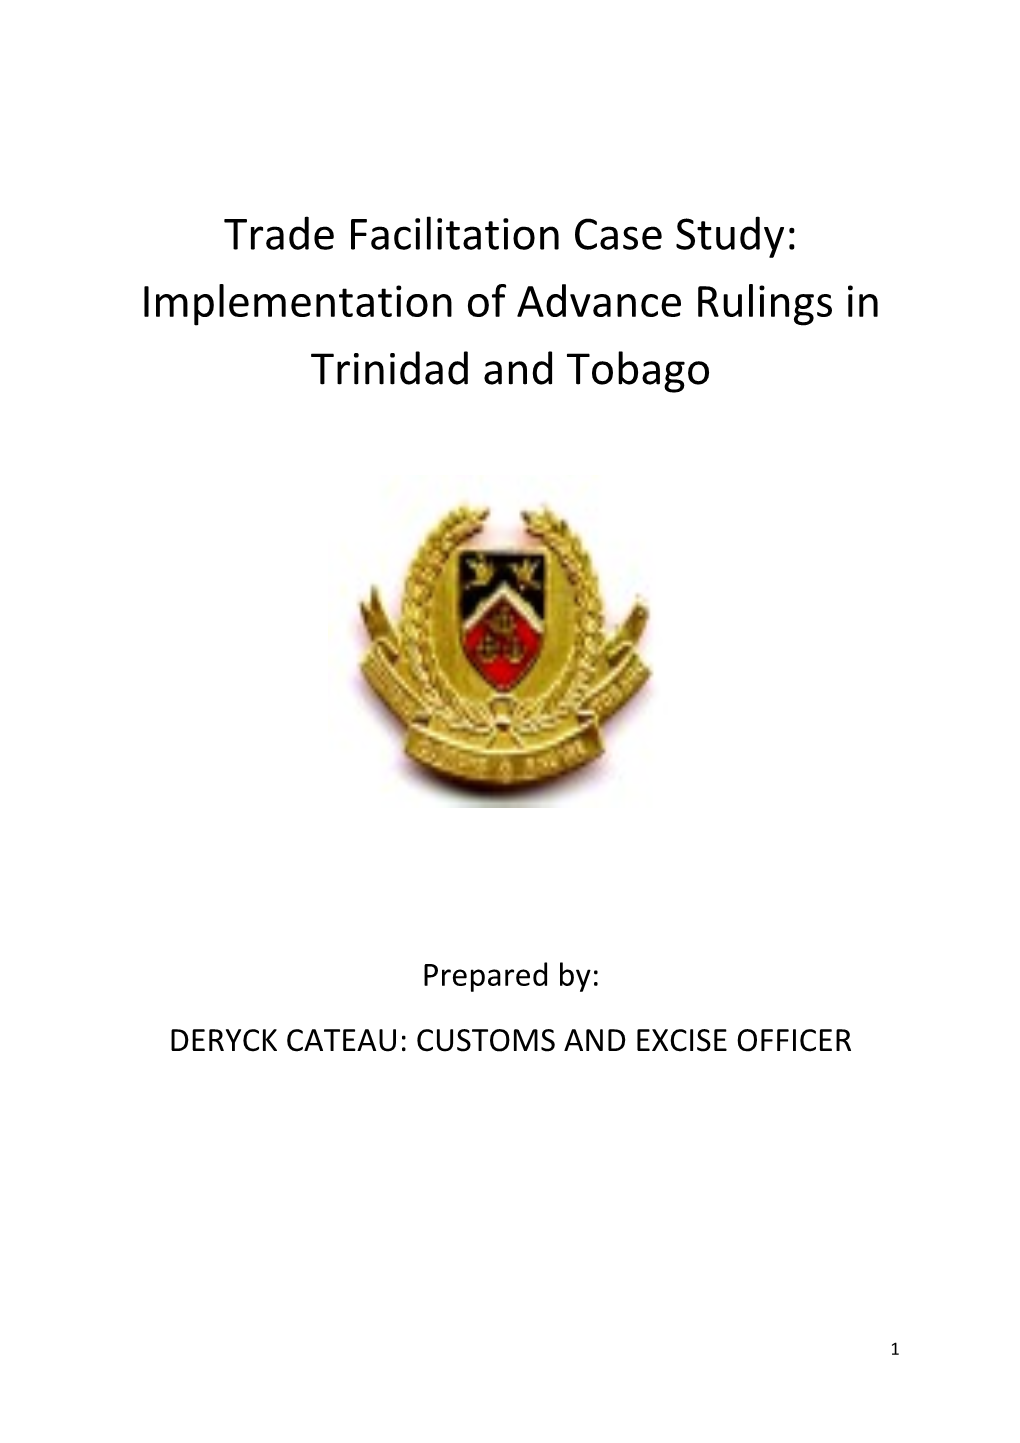 Trade Facilitation Case Study: Implementation of Advance Rulings Intrinidad and Tobago